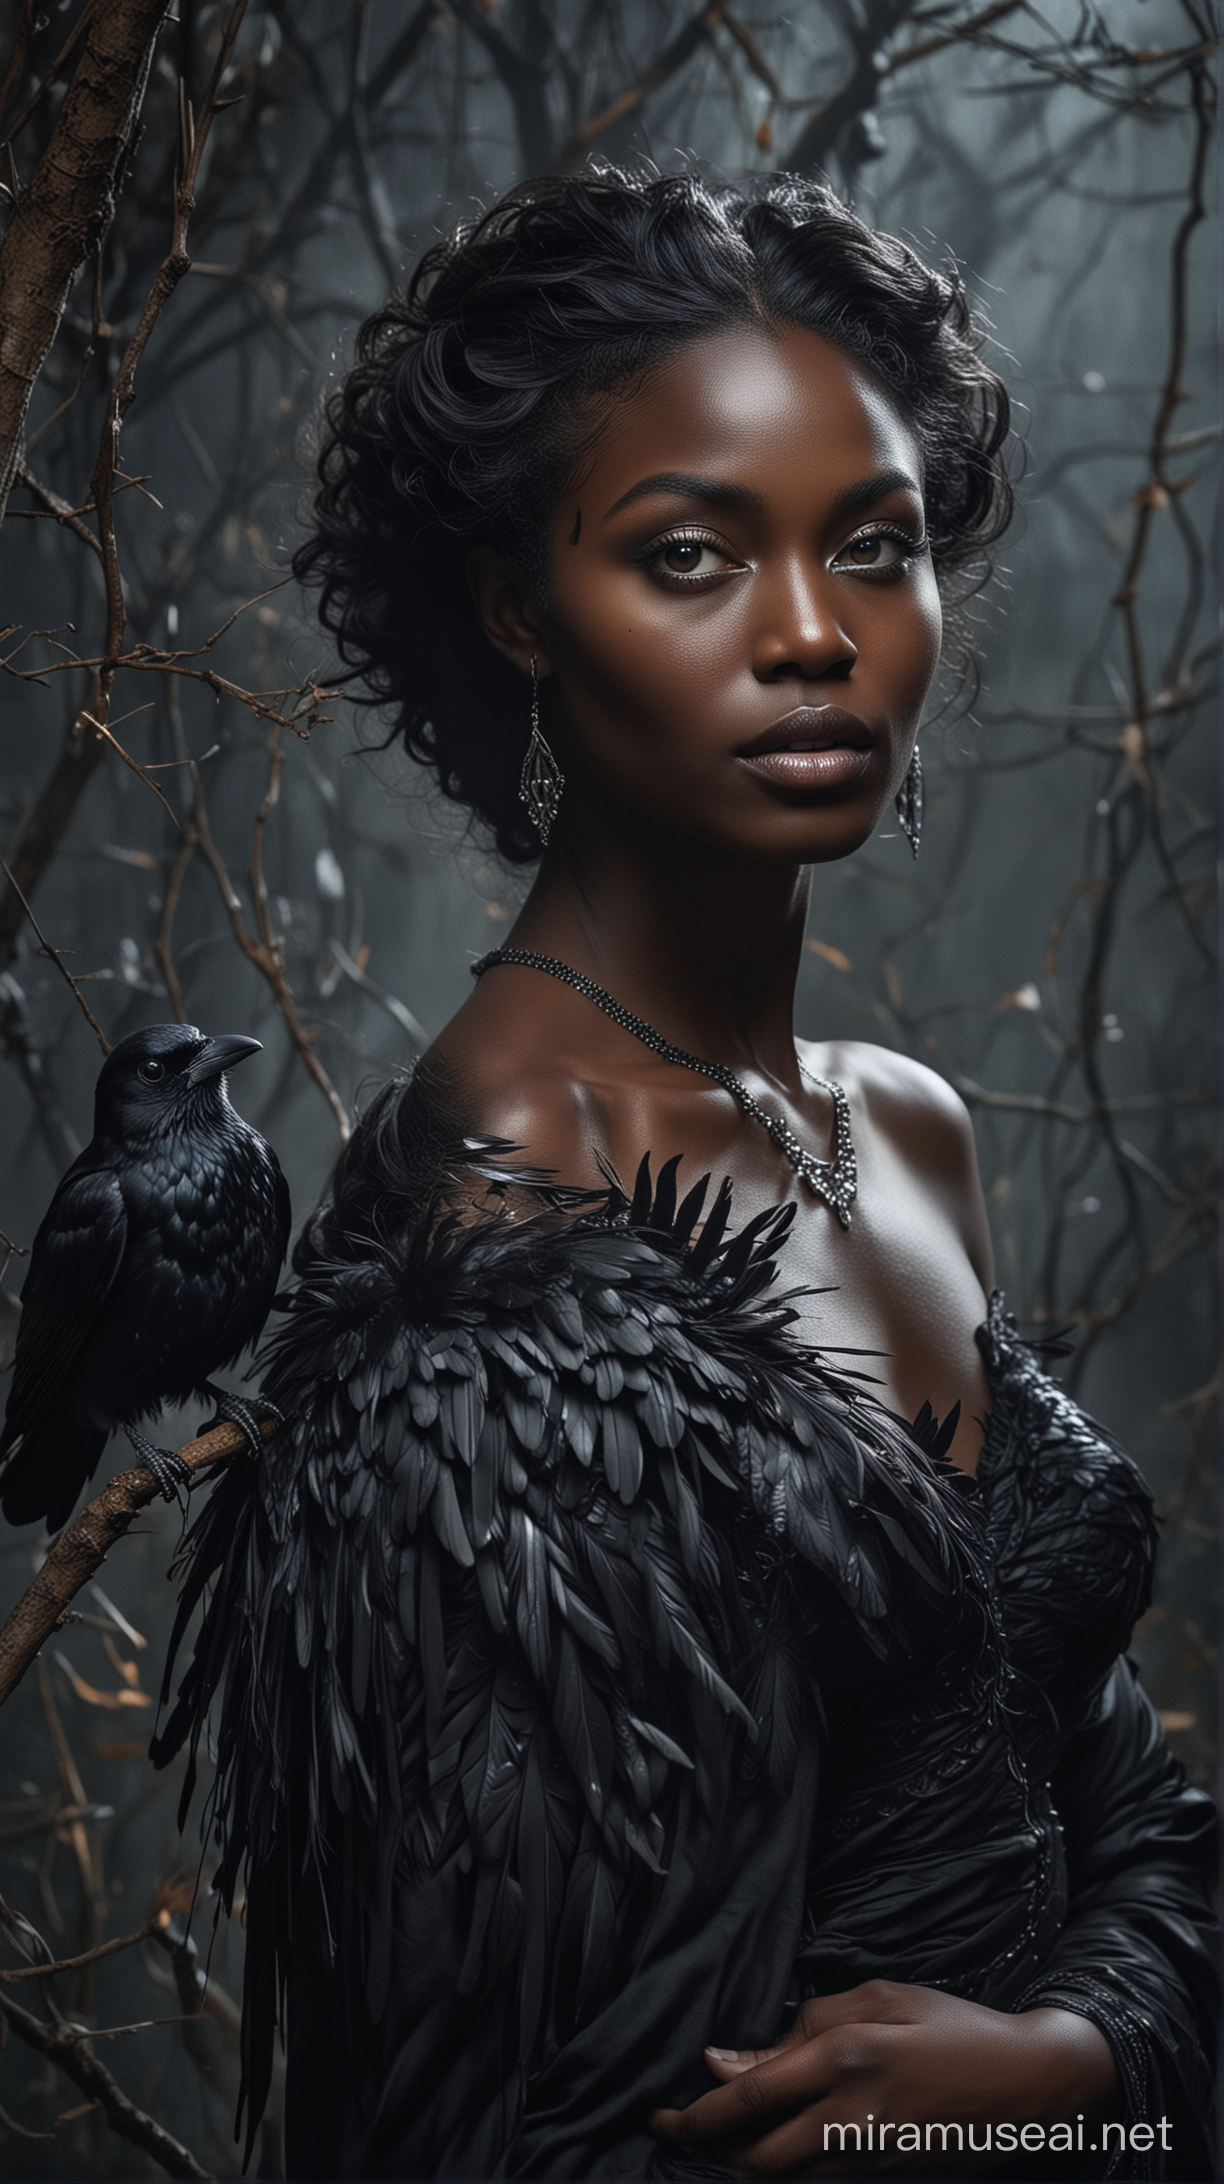 Mystical Portrait of a Radiant Black Woman with a Piercing Gaze and Majestic Raven